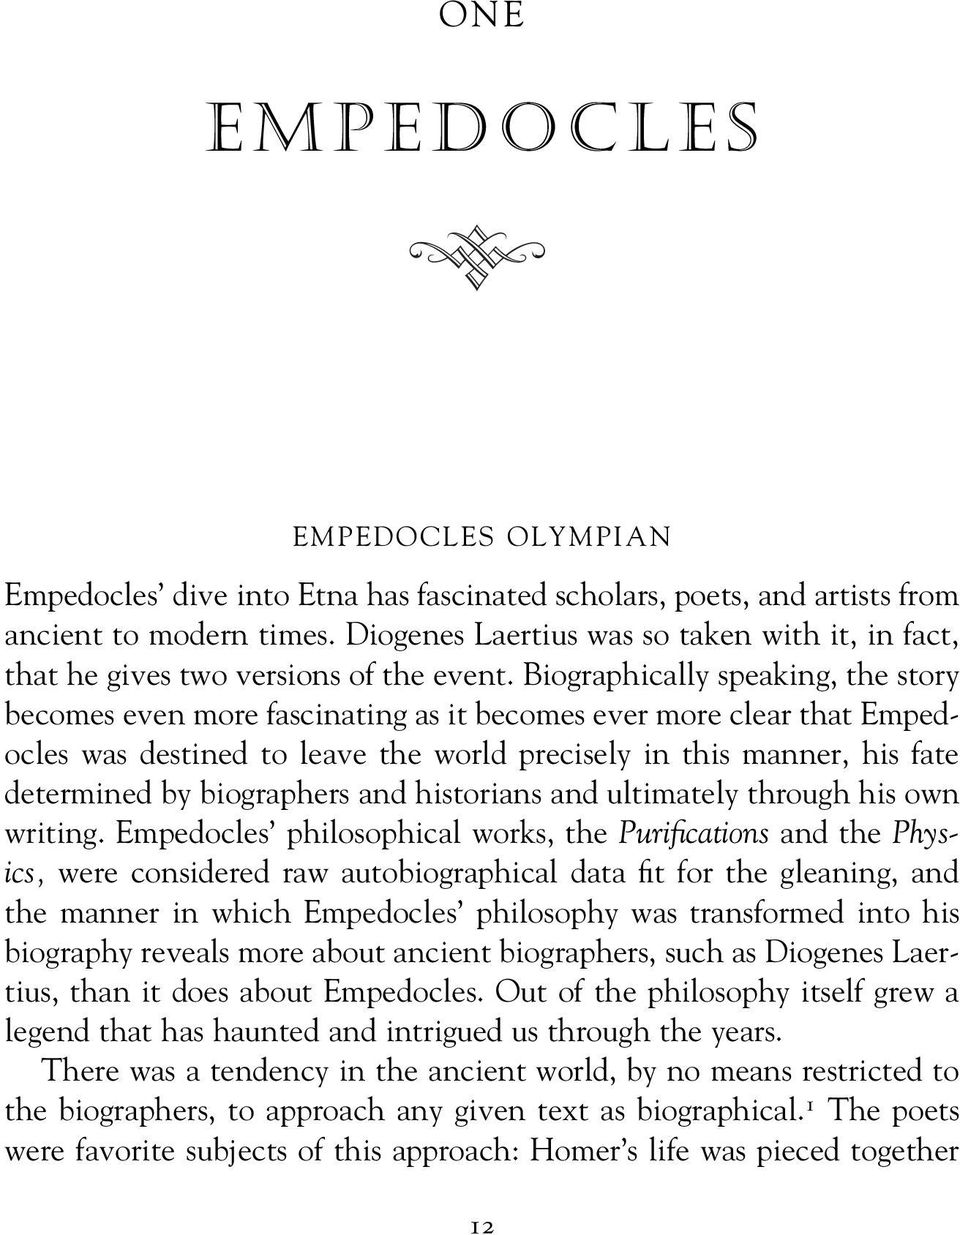 Biographically speaking, the story becomes even more fascinating as it becomes ever more clear that Empedocles was destined to leave the world precisely in this manner, his fate determined by